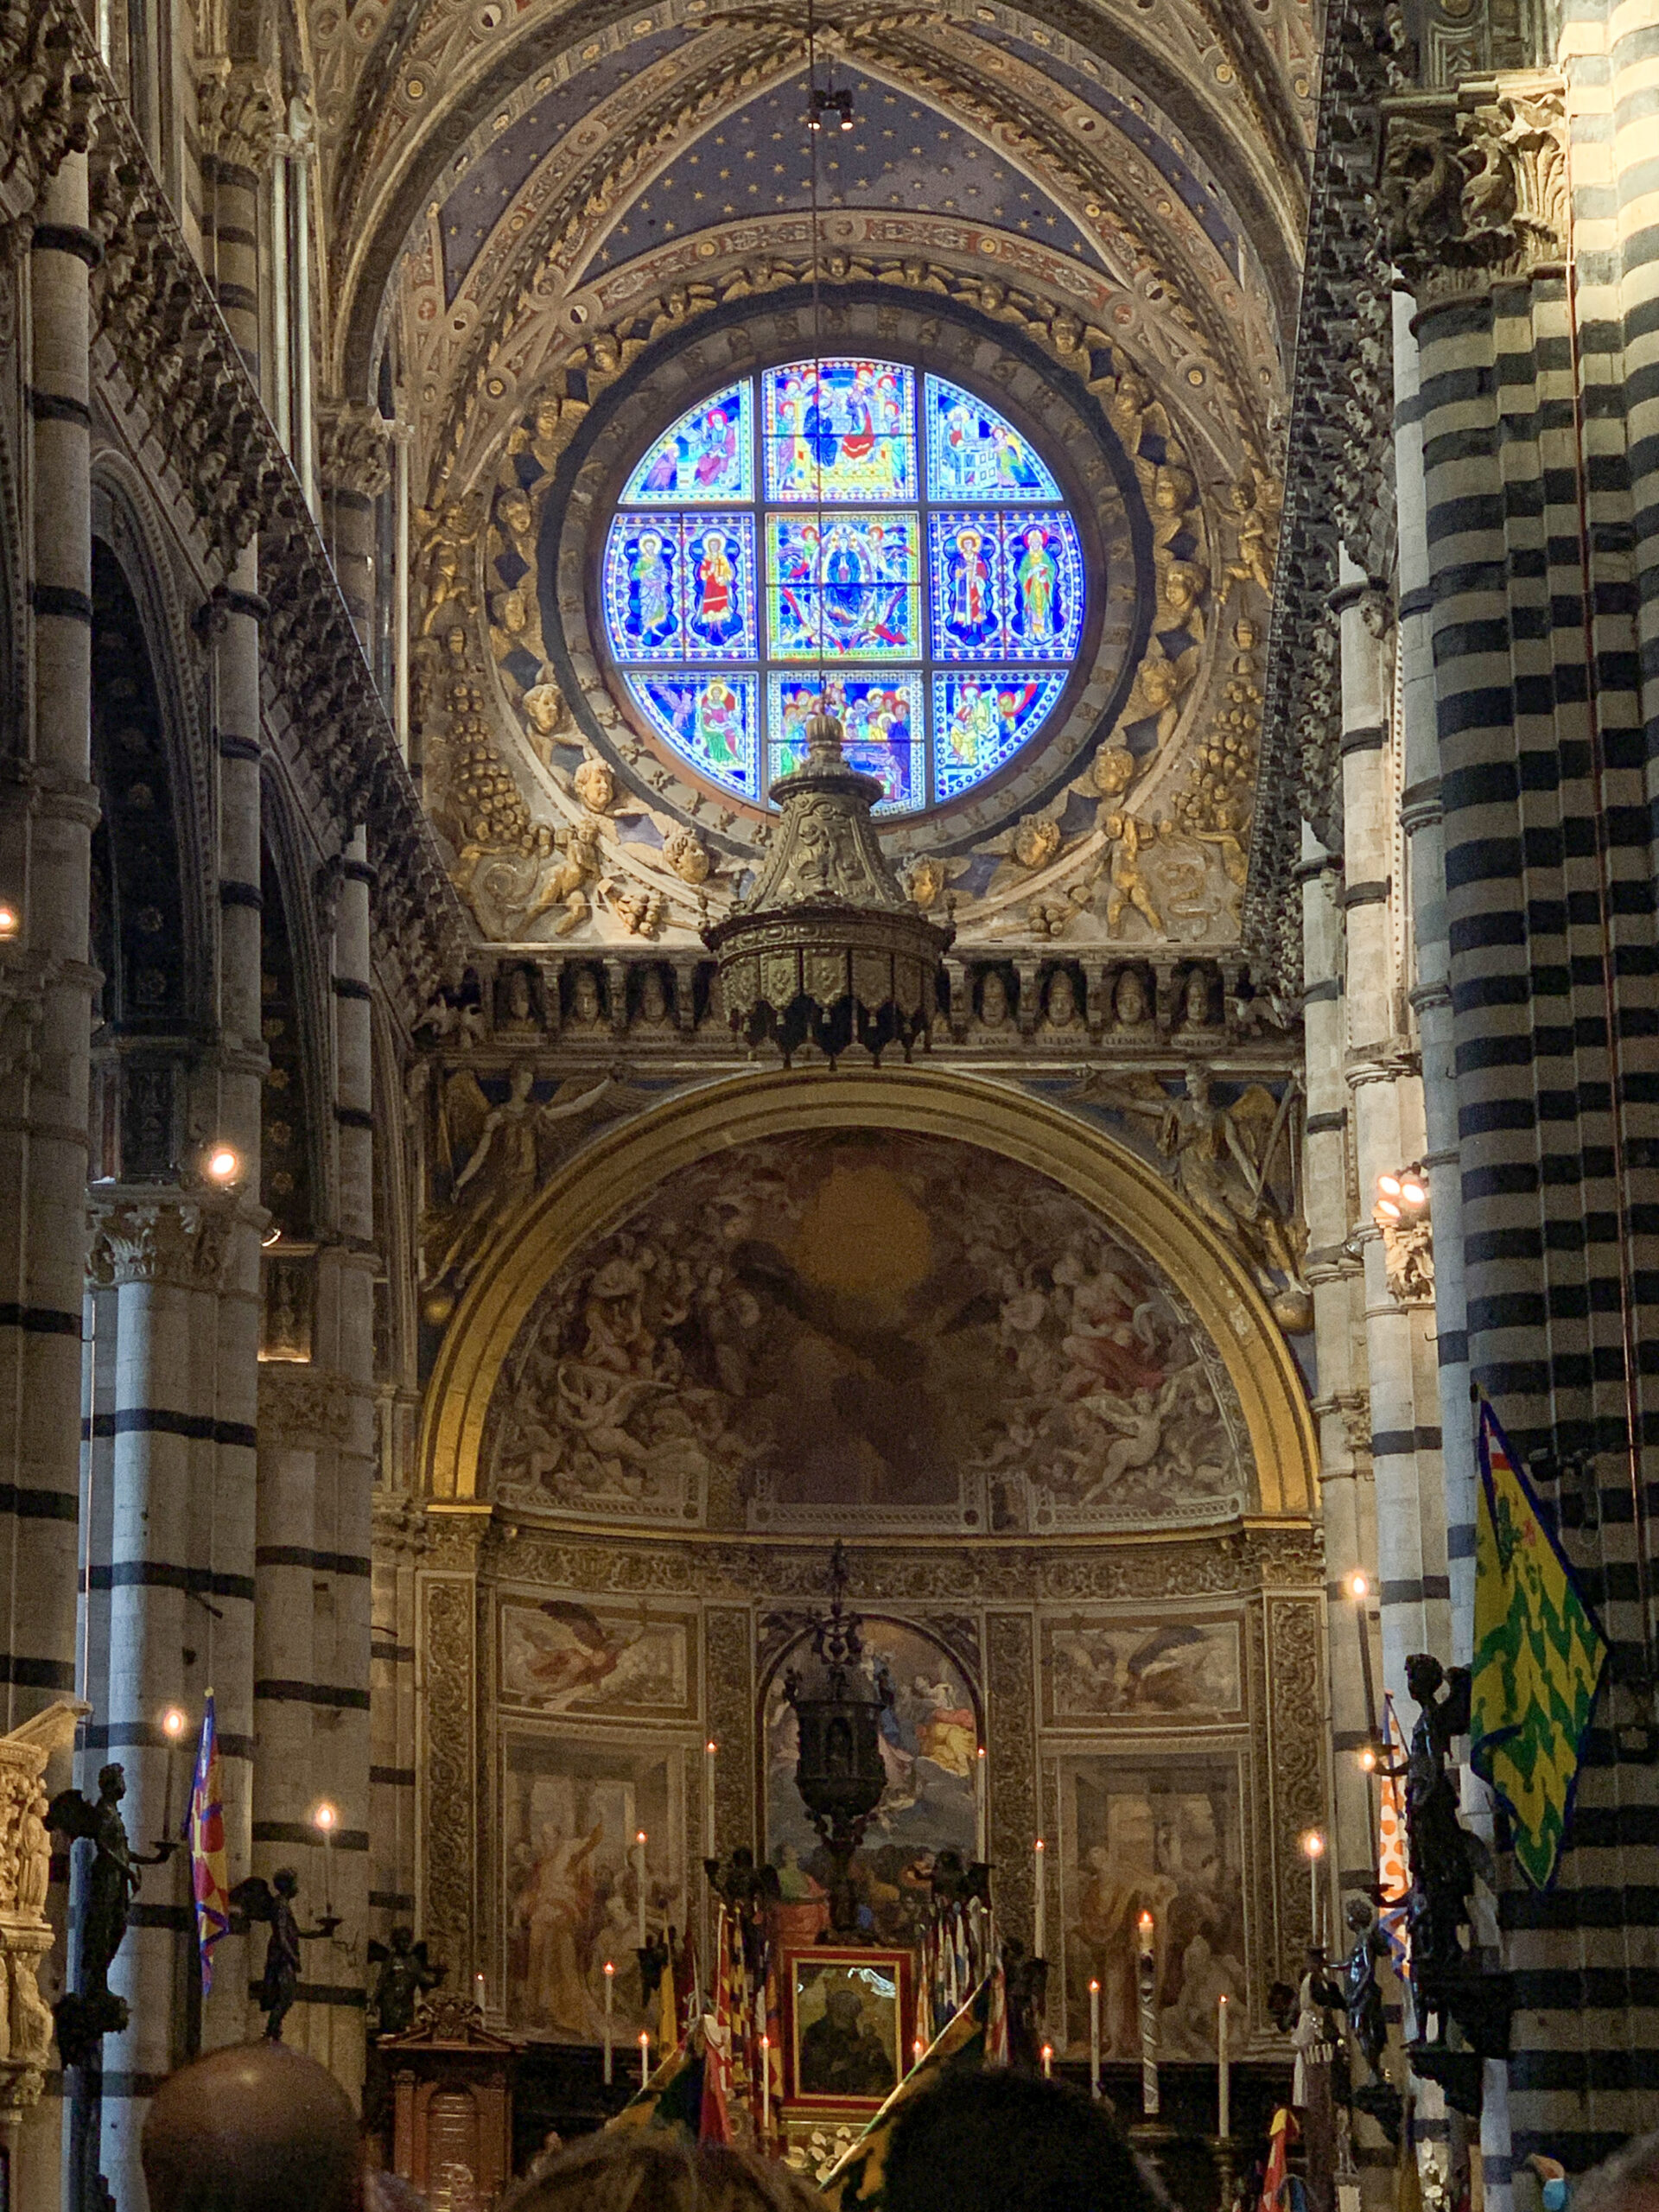 Dome of Siena